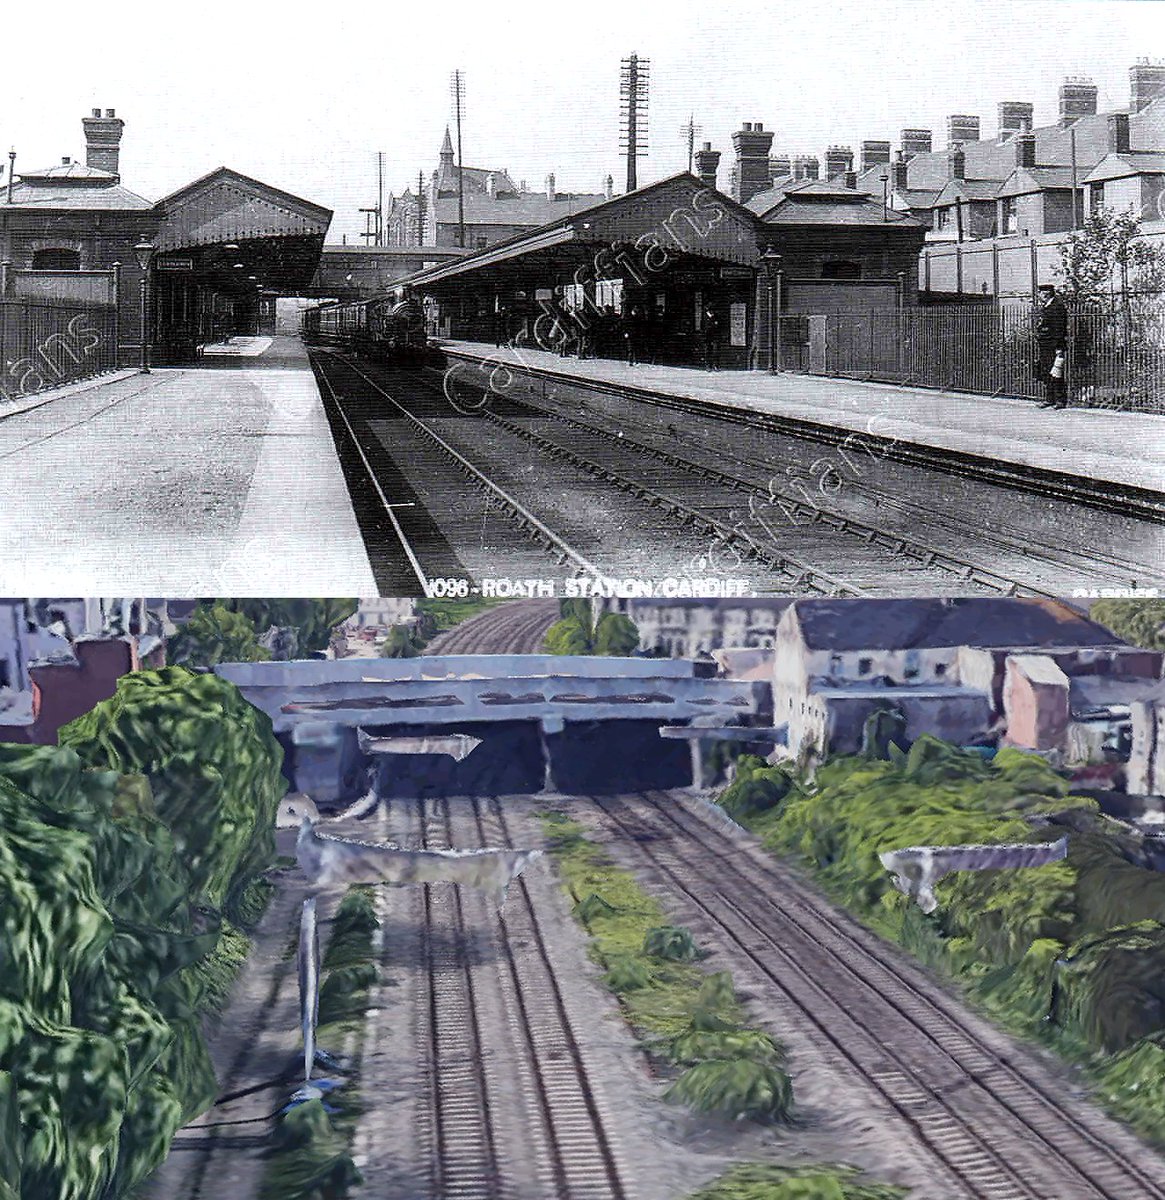 37) Roath Train Station - Located in Splott between Pearl St and Railway St and crossed by Splott Rd, part of the GWR mainline.